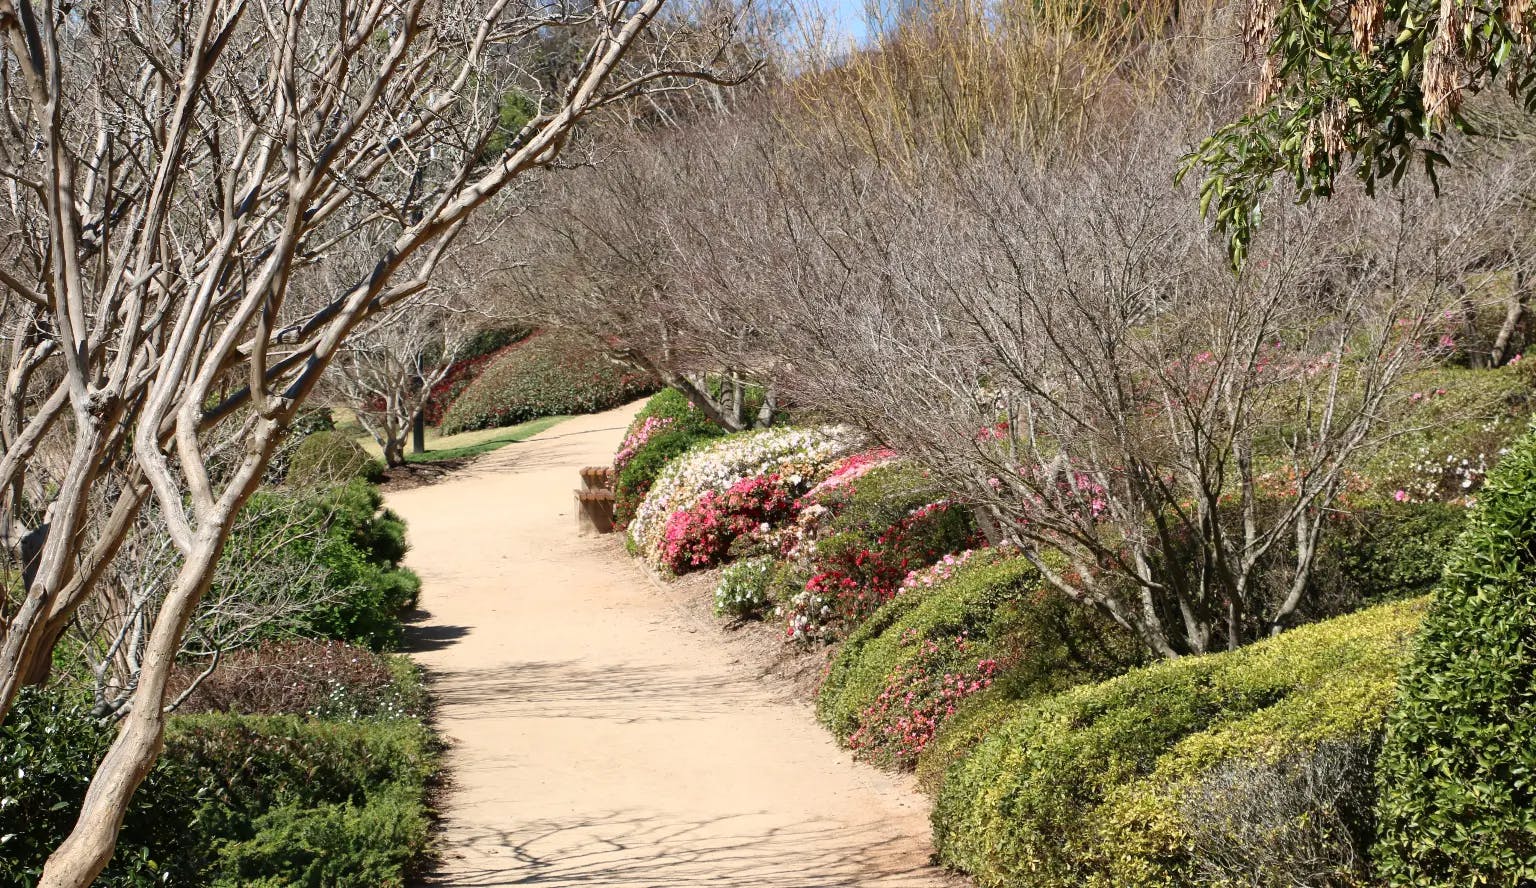 A narrow dirt pathway winds through a garden with blooming pink, red, and white flowers on either side. Leafless trees arch over the path, while various bushes and green foliage line the area. A wooden bench is situated to the left along the trail.